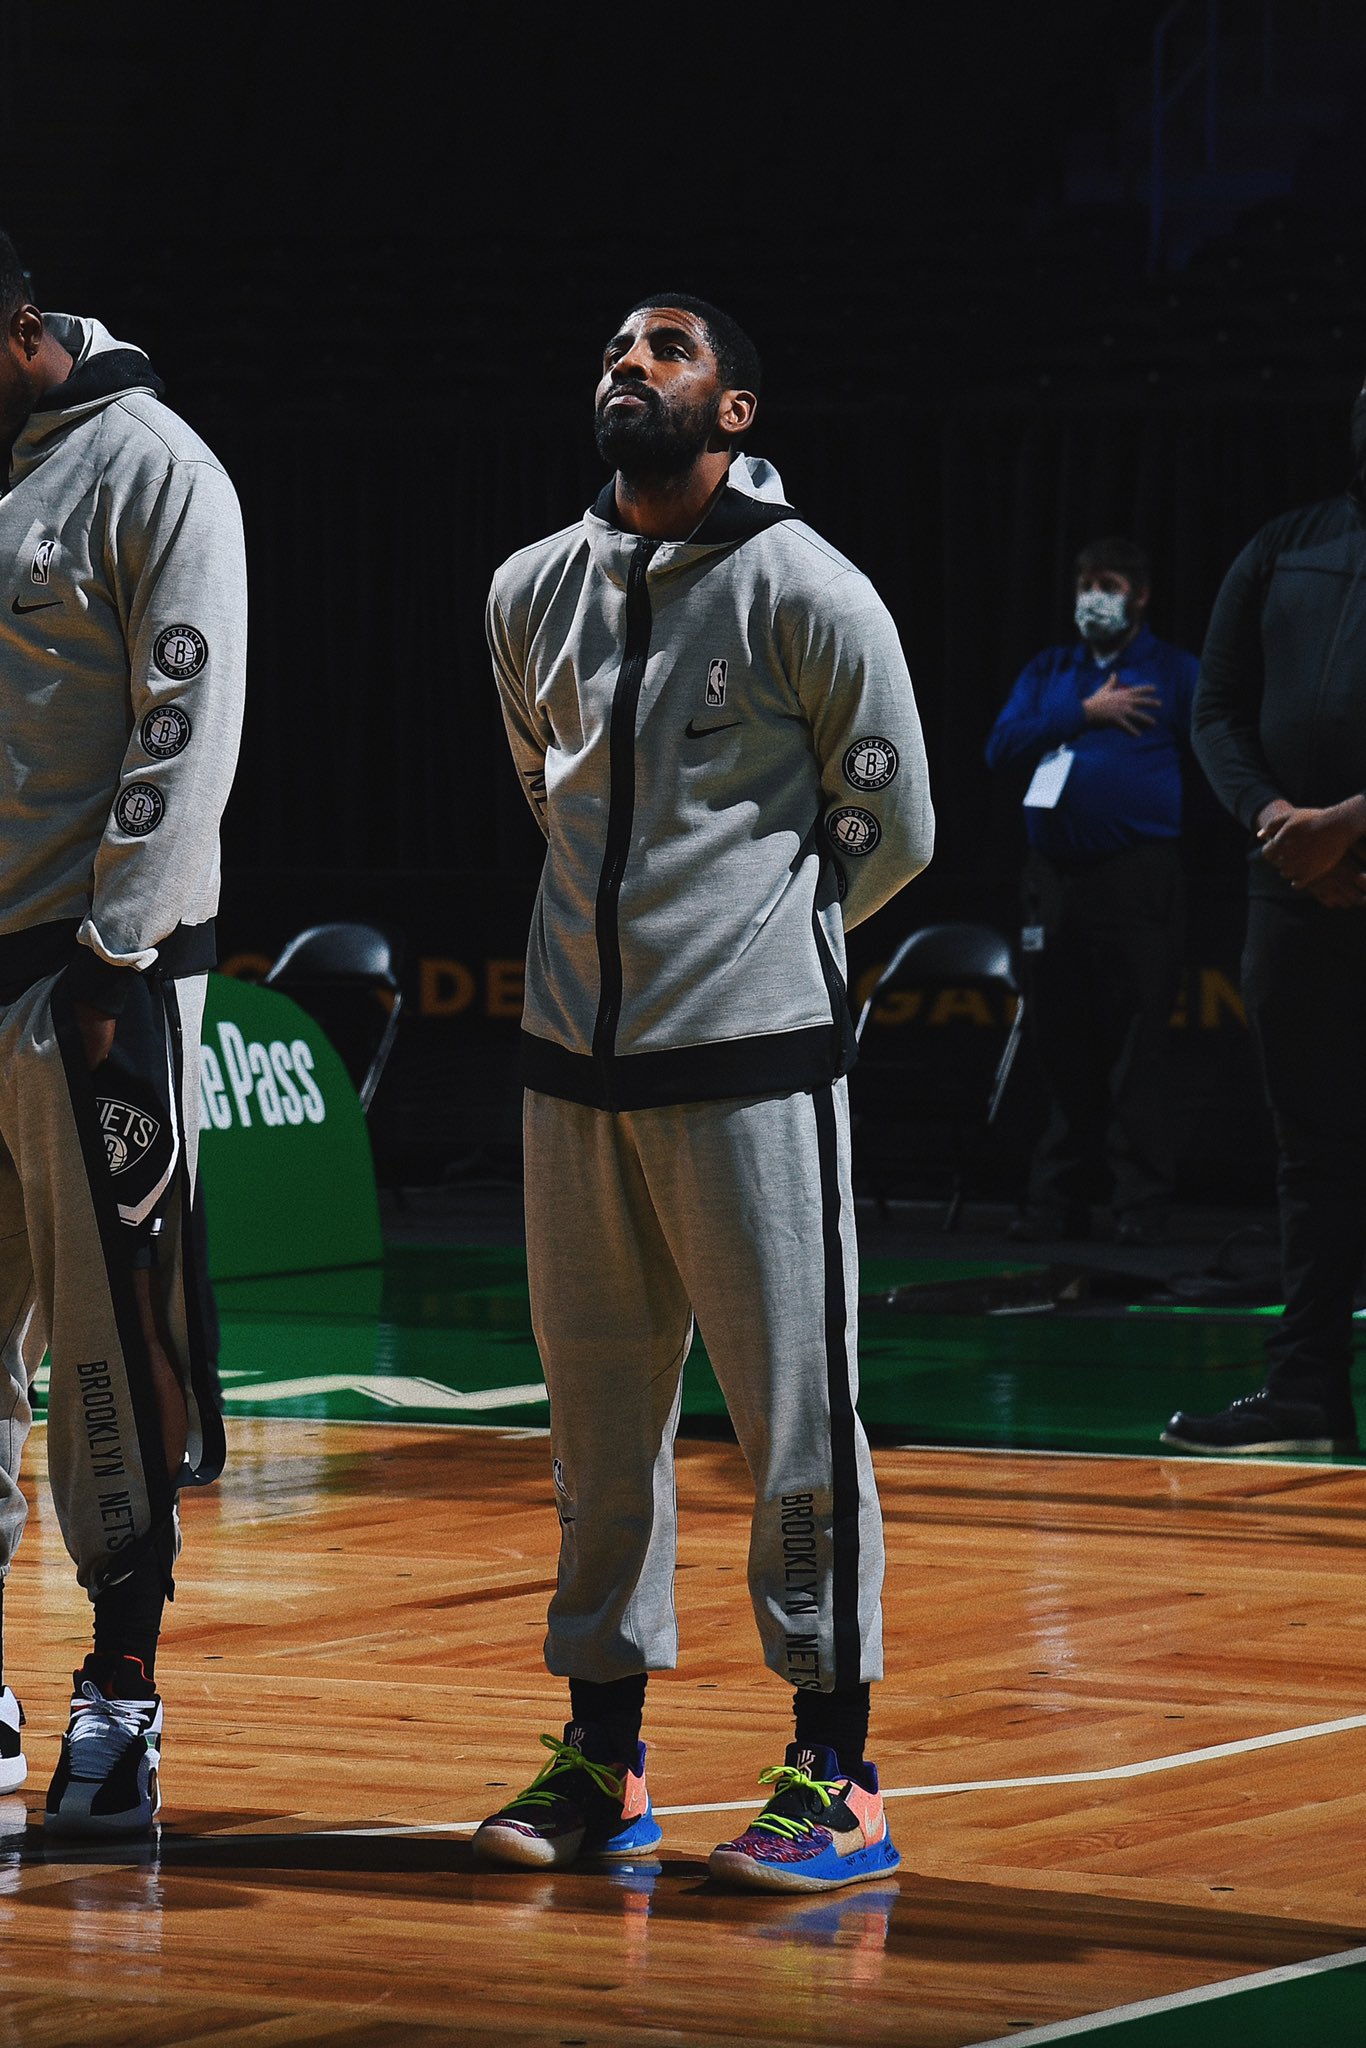 kyrie irving wearing kyrie 3